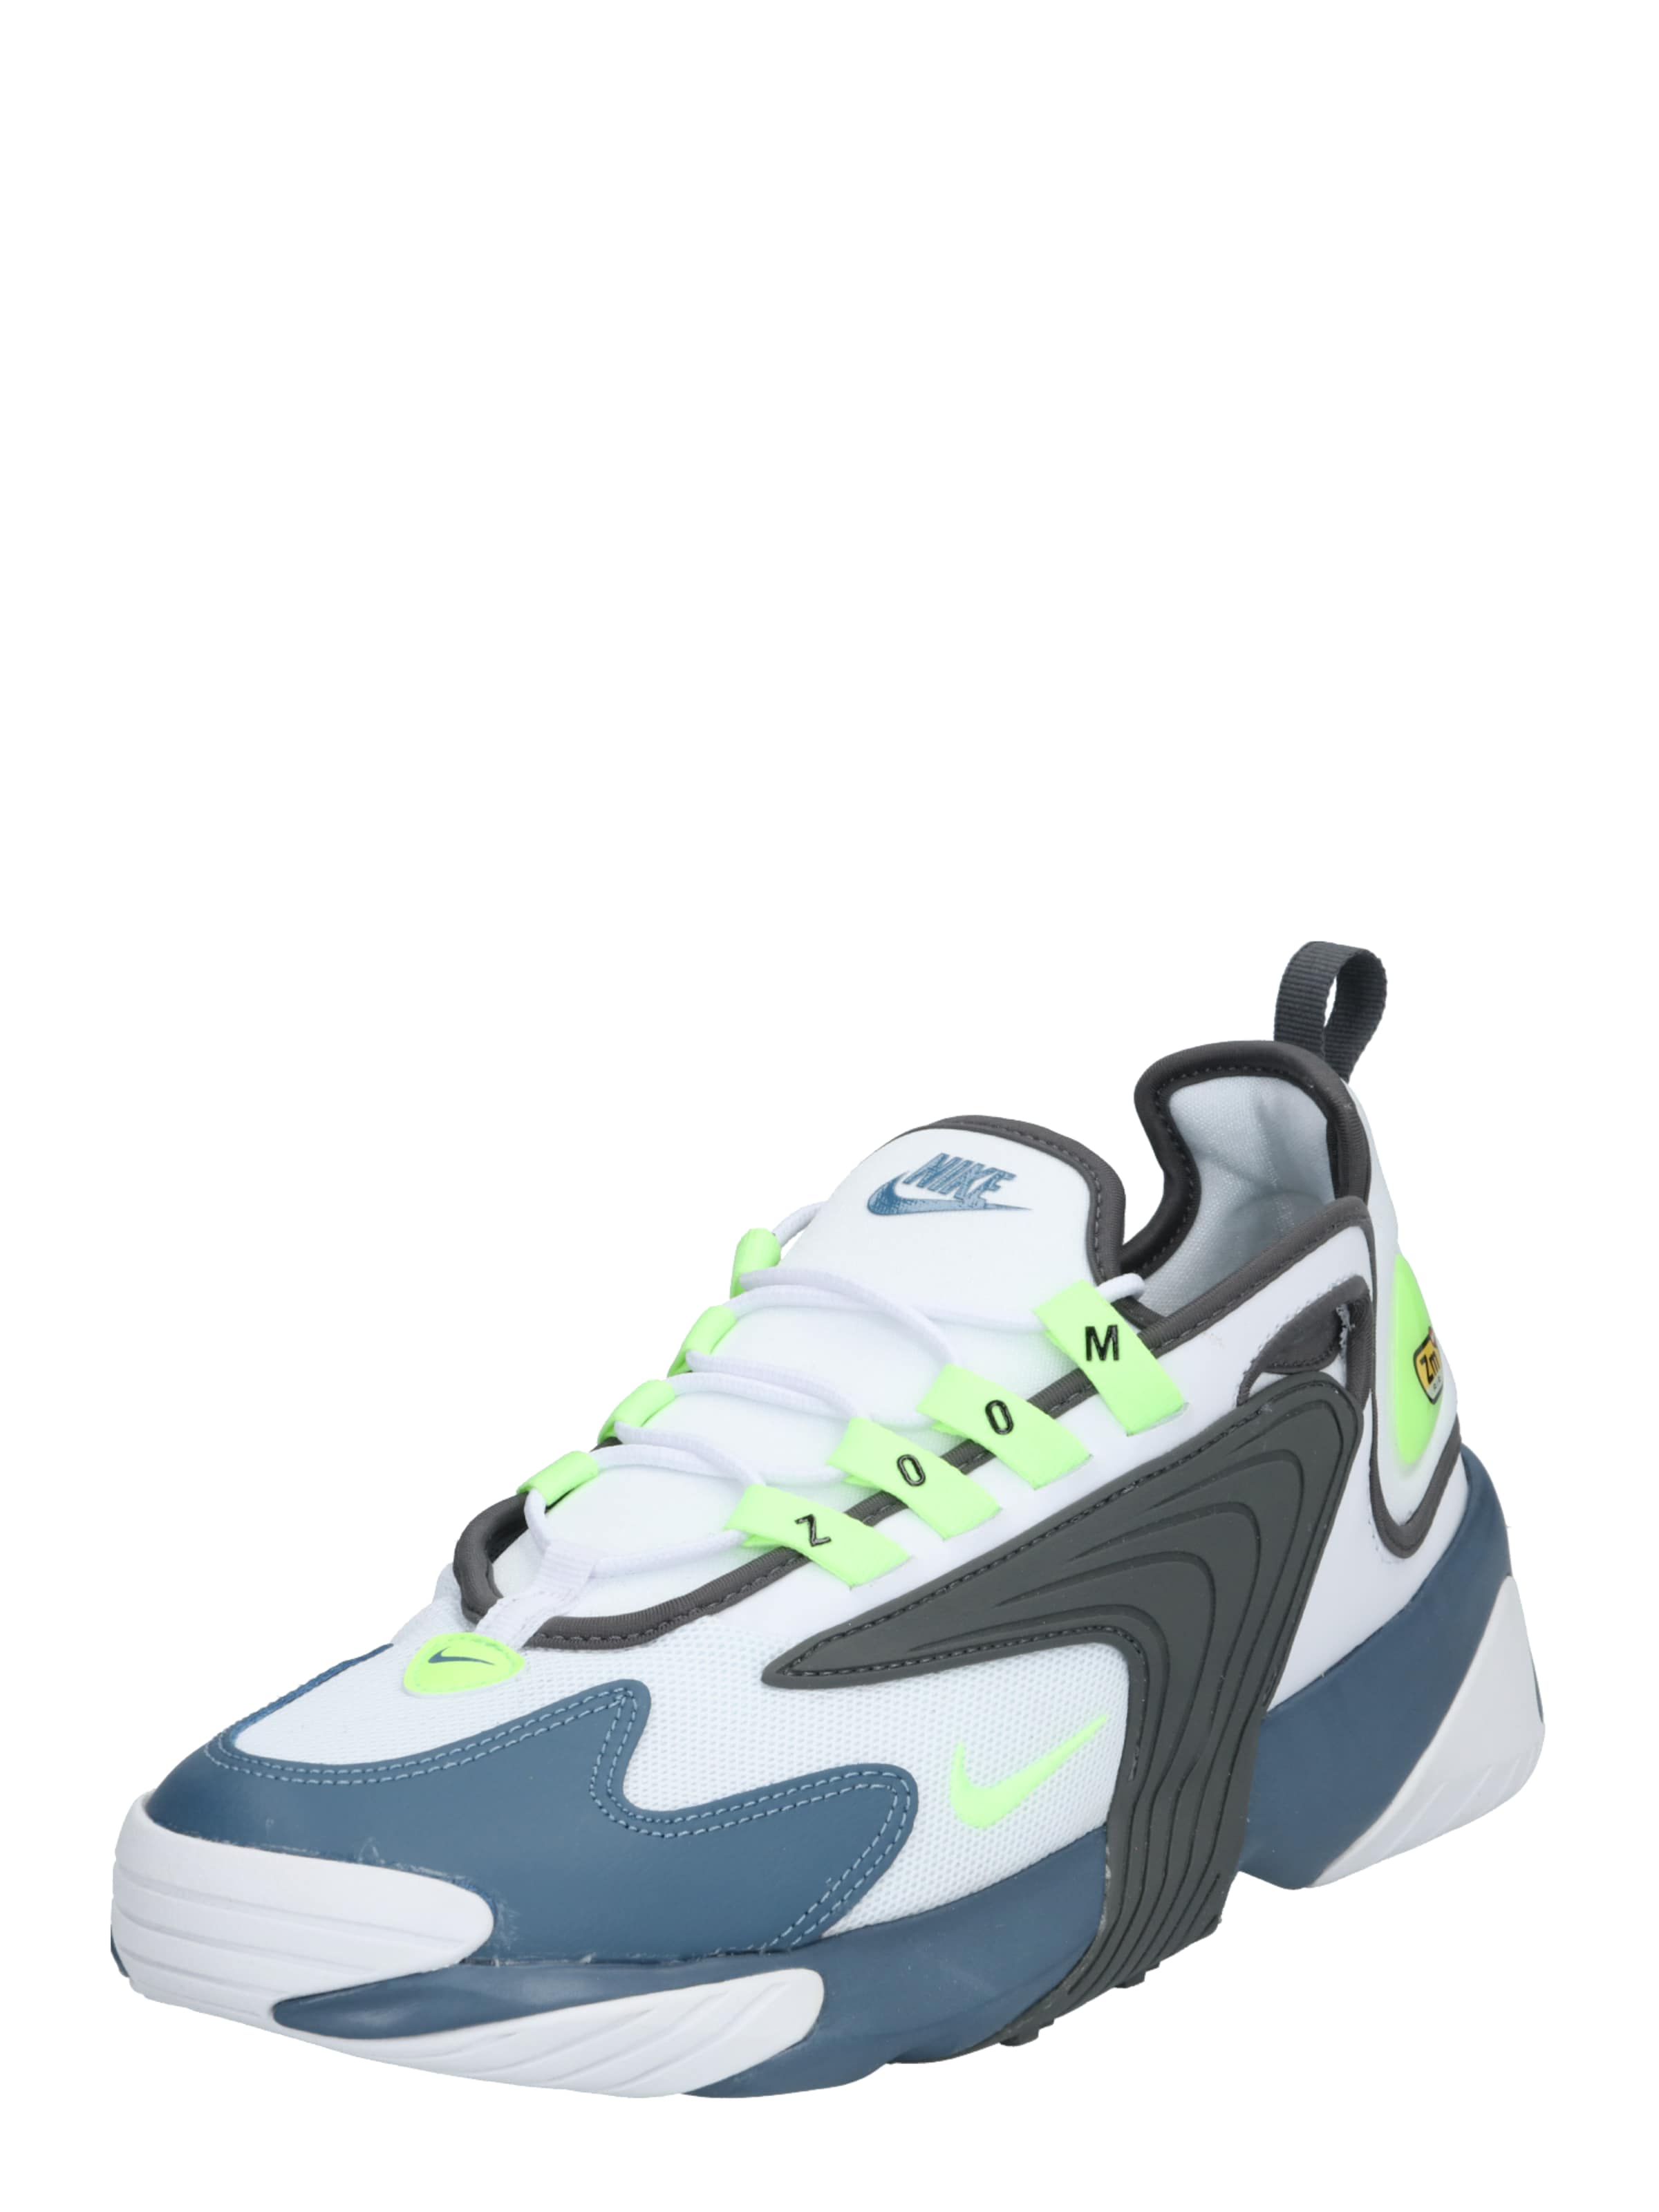 nike zoom 2k about you 